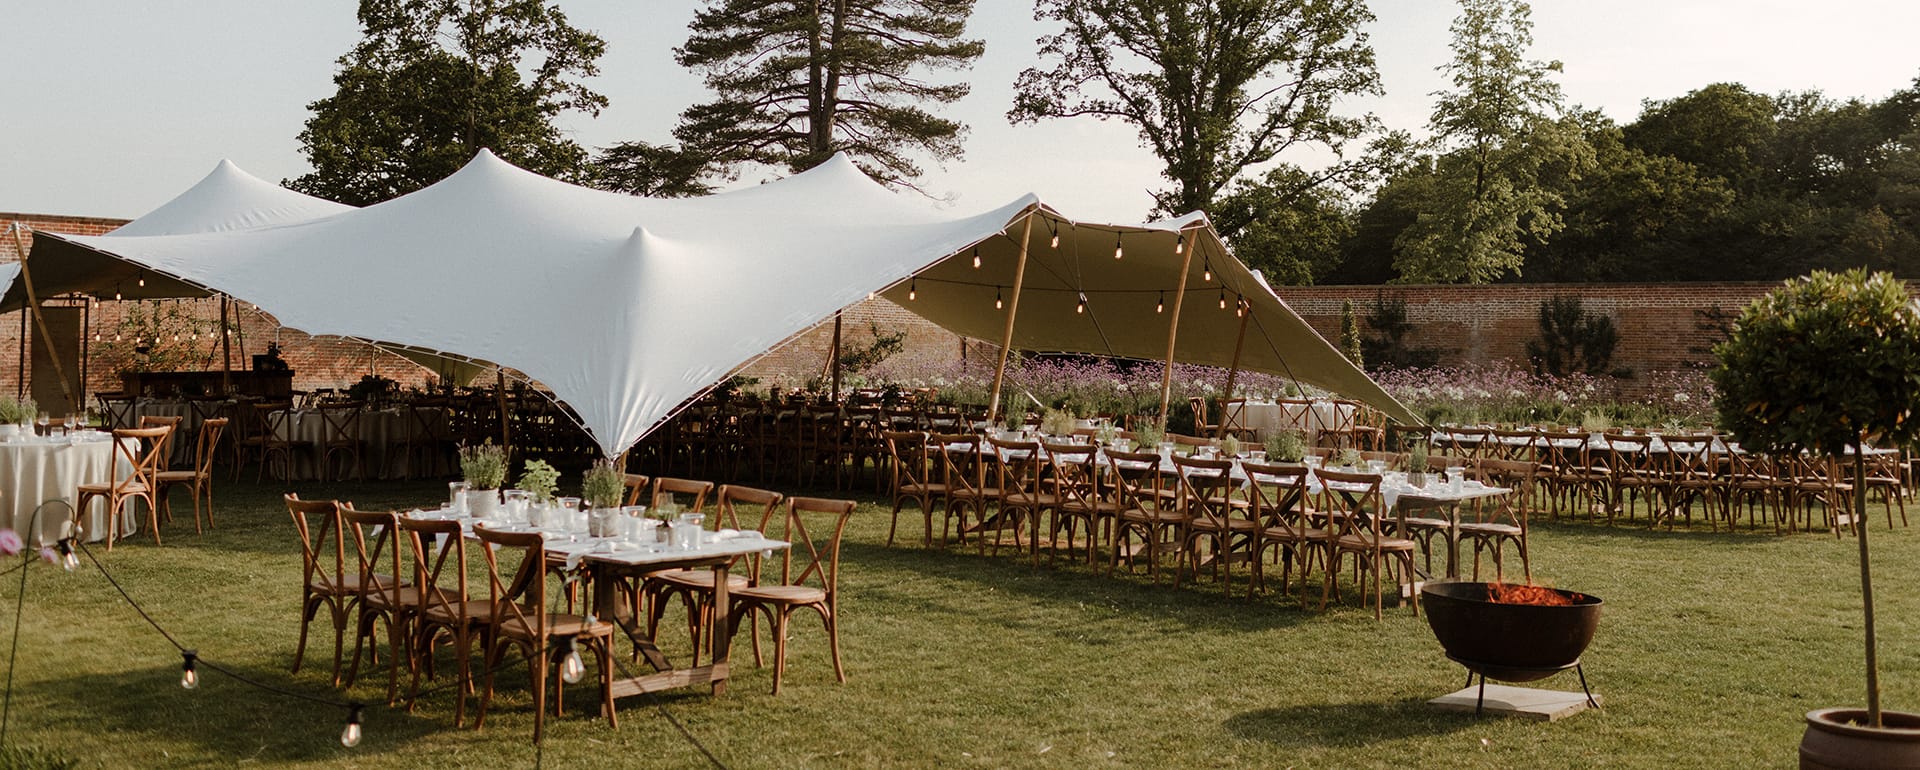 Top Tips for Planning an Outdoor Wedding